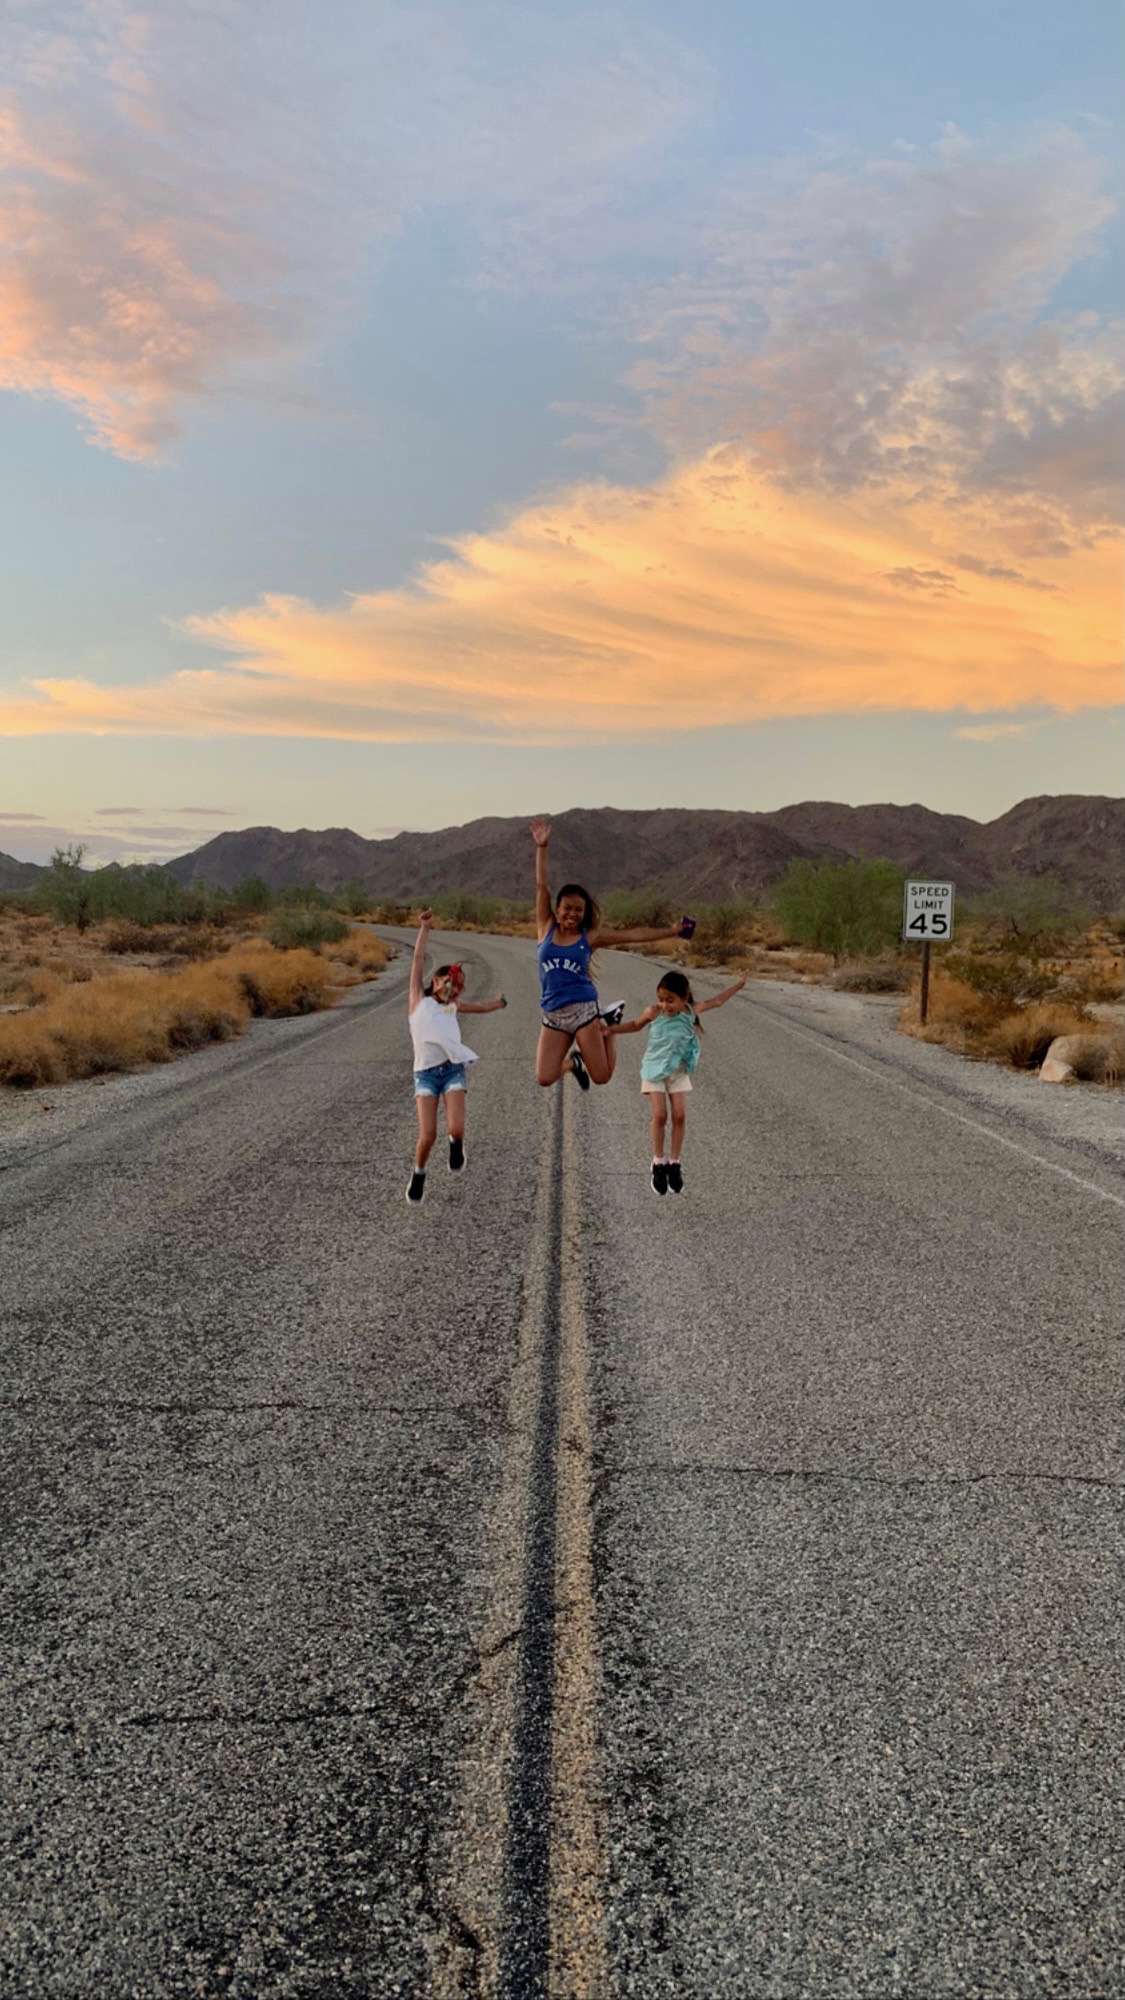 kids and mom jumping in the middle of a road in Joshua Tree